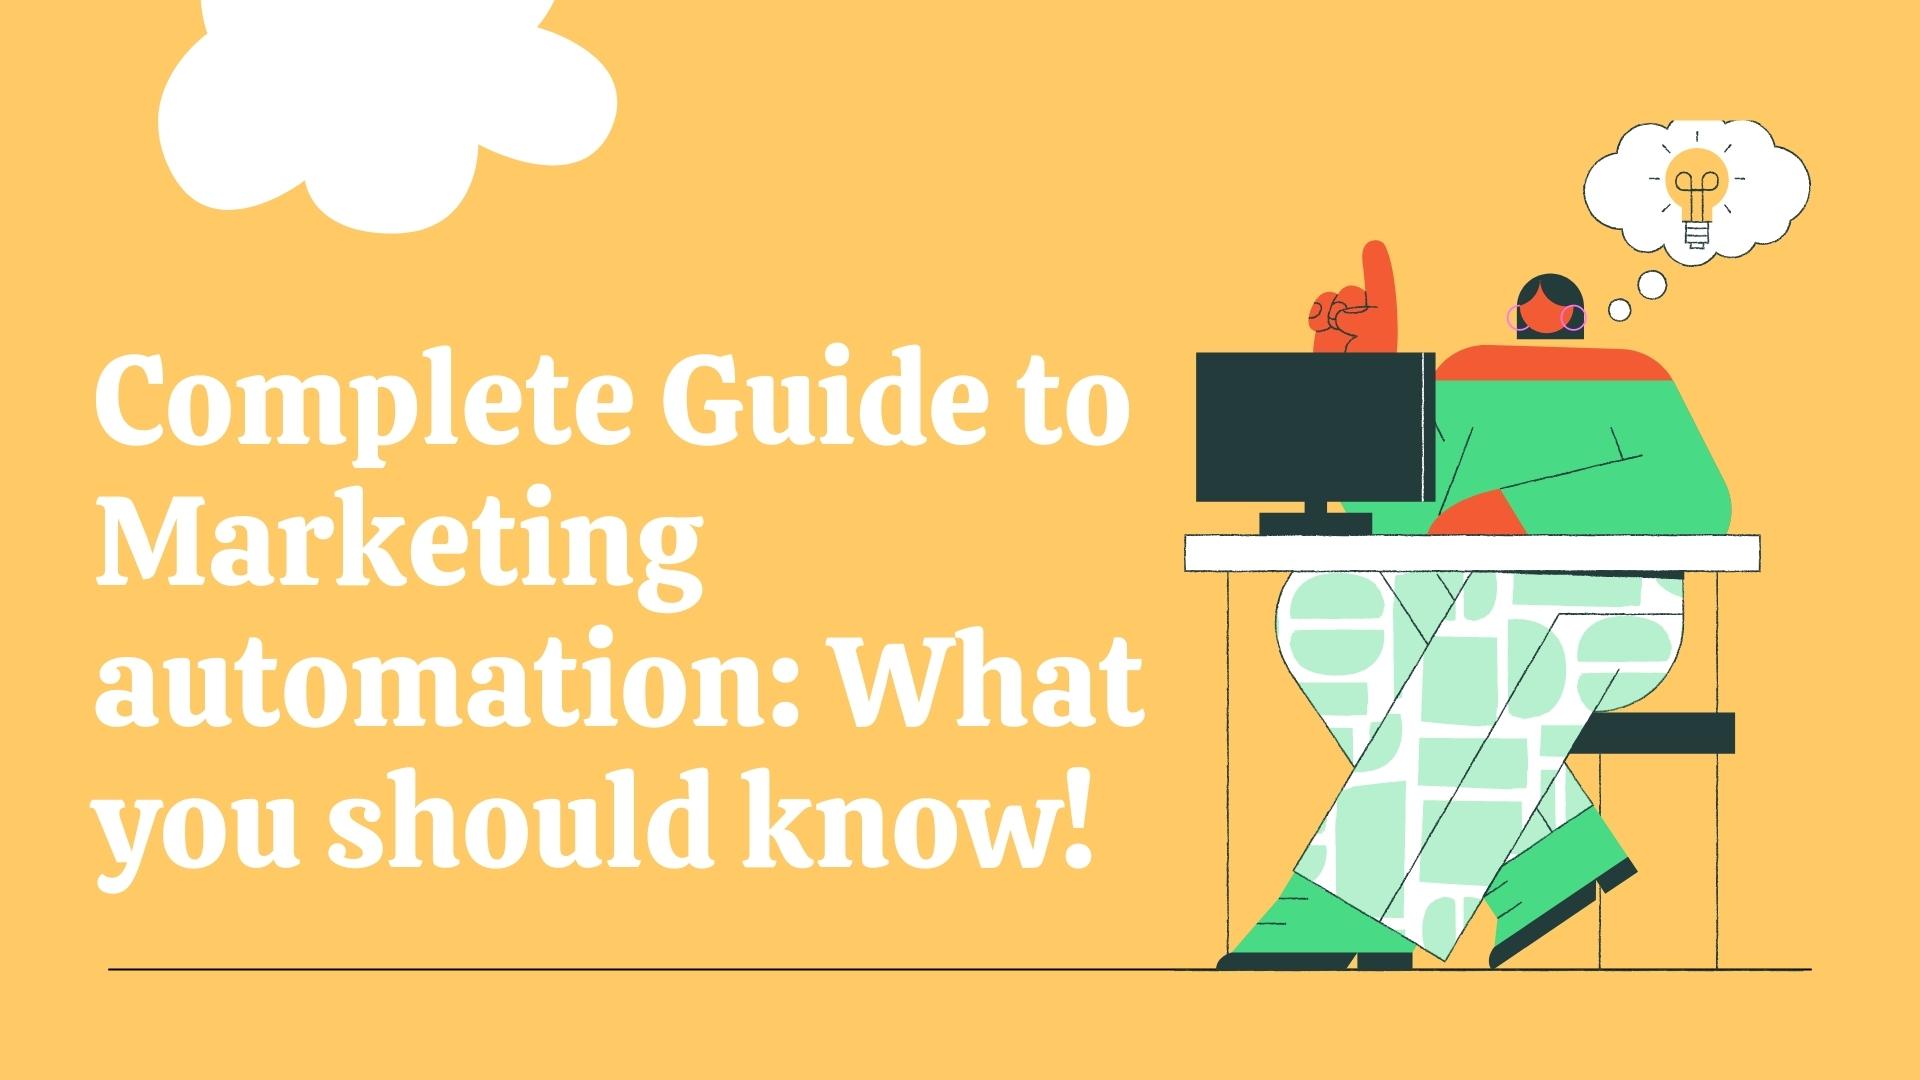 Complete Guide To Marketing Automation - What You Should Know